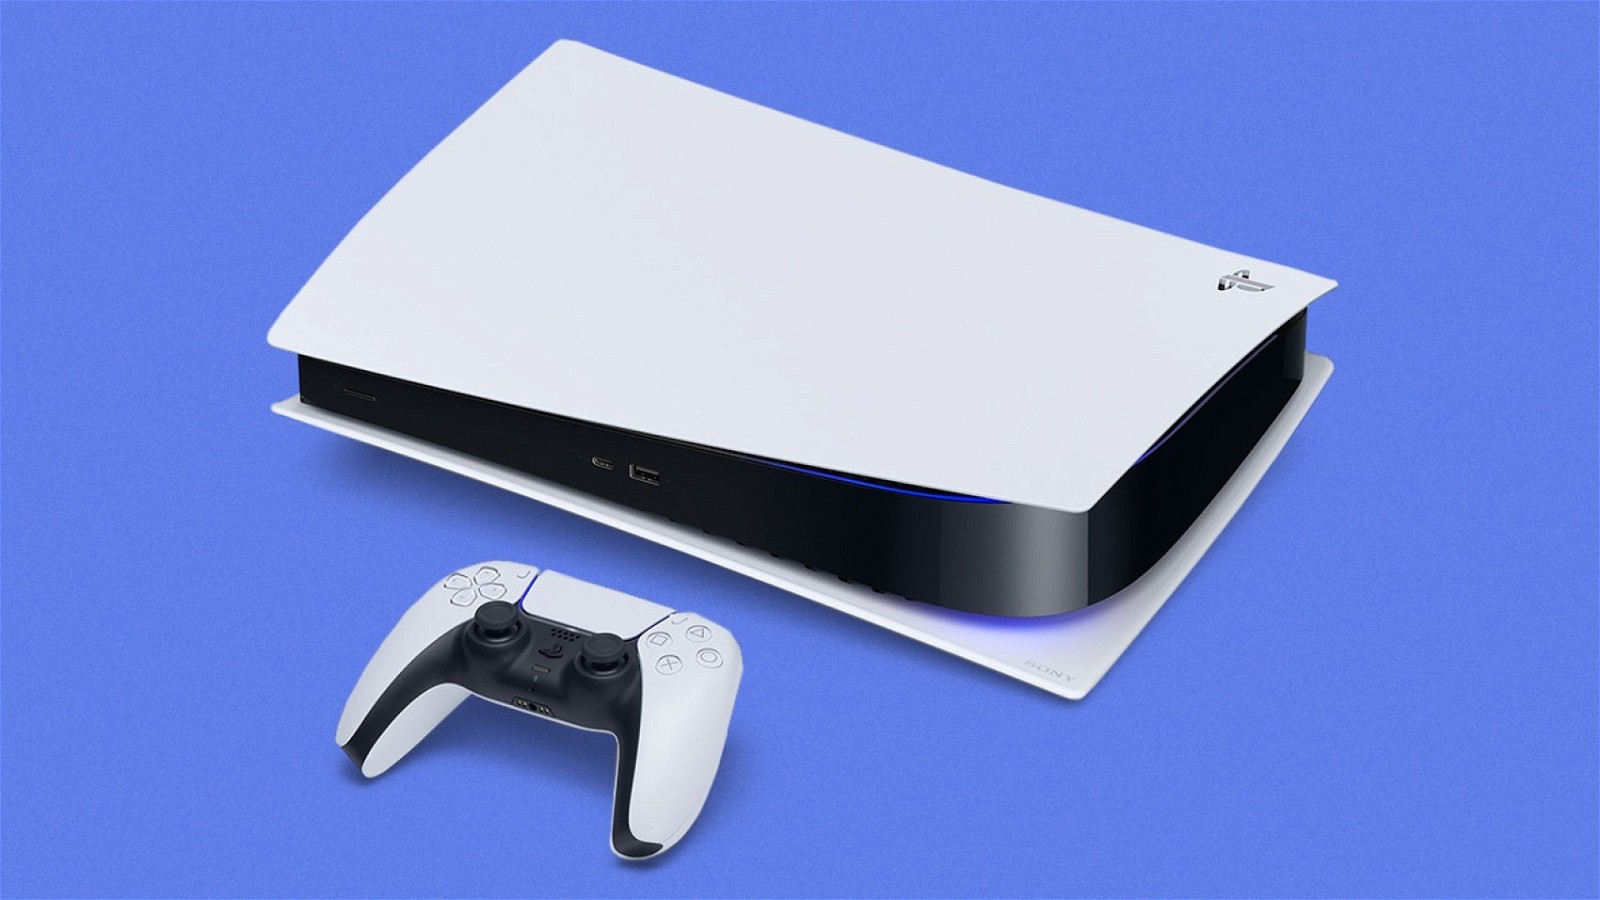 Sony is giving away an AAA title to new PlayStation 5 console owners